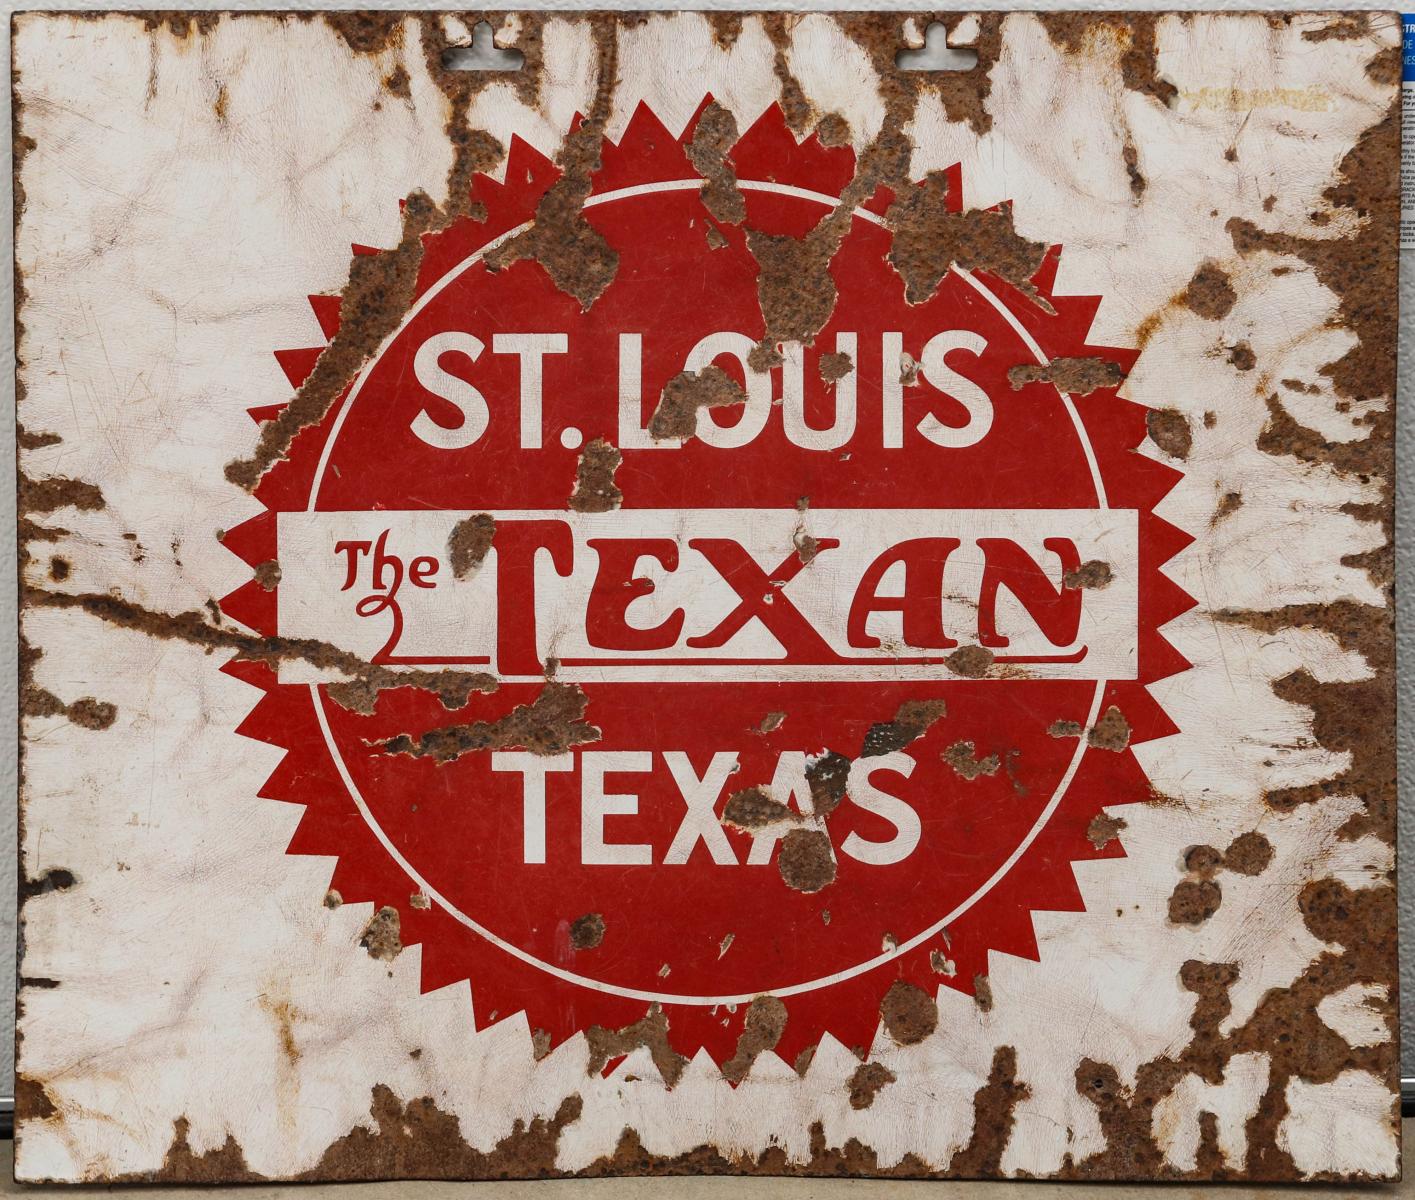 MISSOURI PACIFIC RR PORCELAIN SIGN FOR THE TEXAN